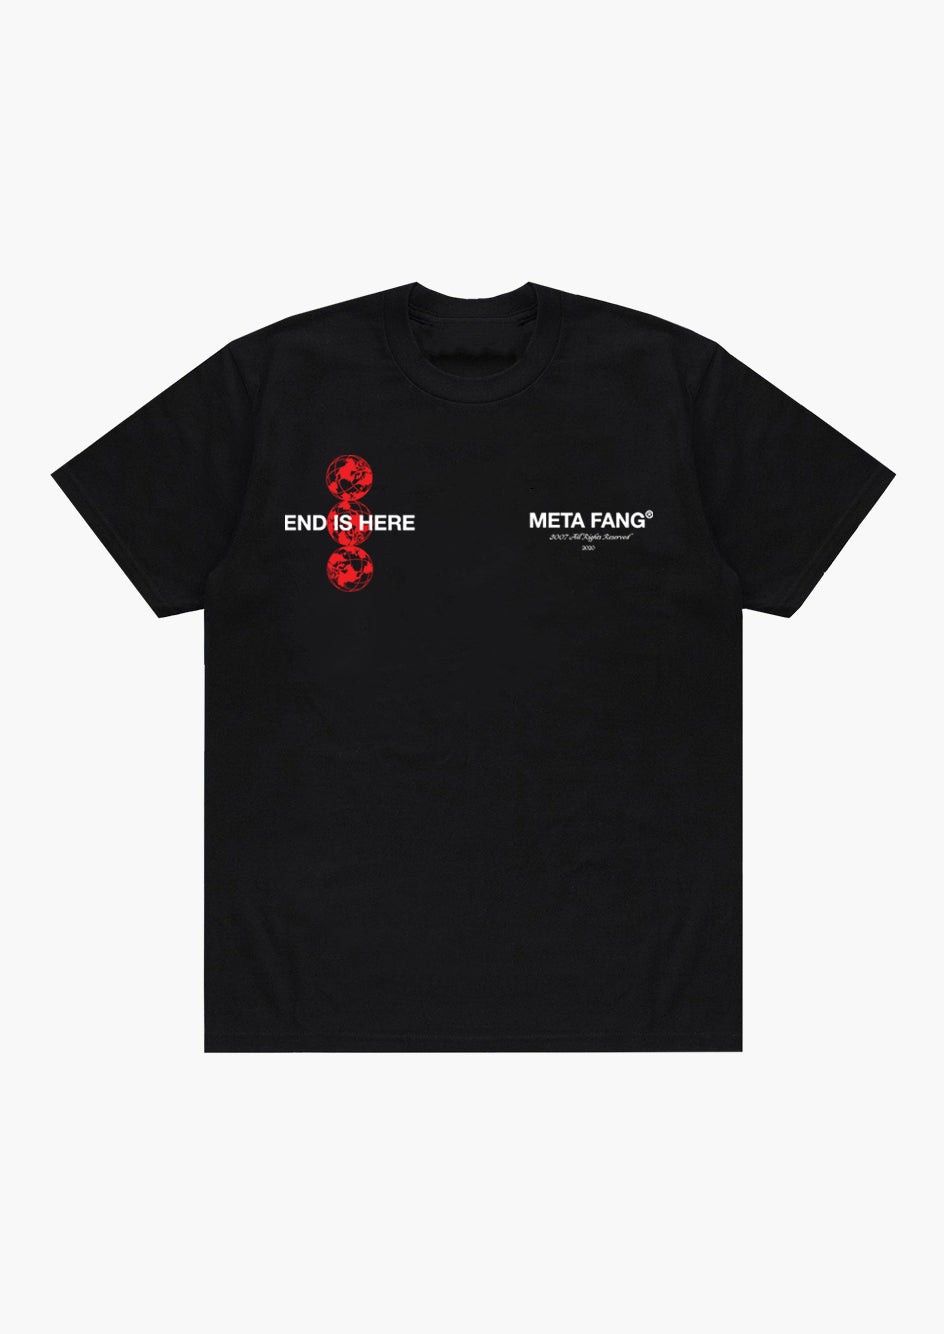 END IS HERE T-SHIRT